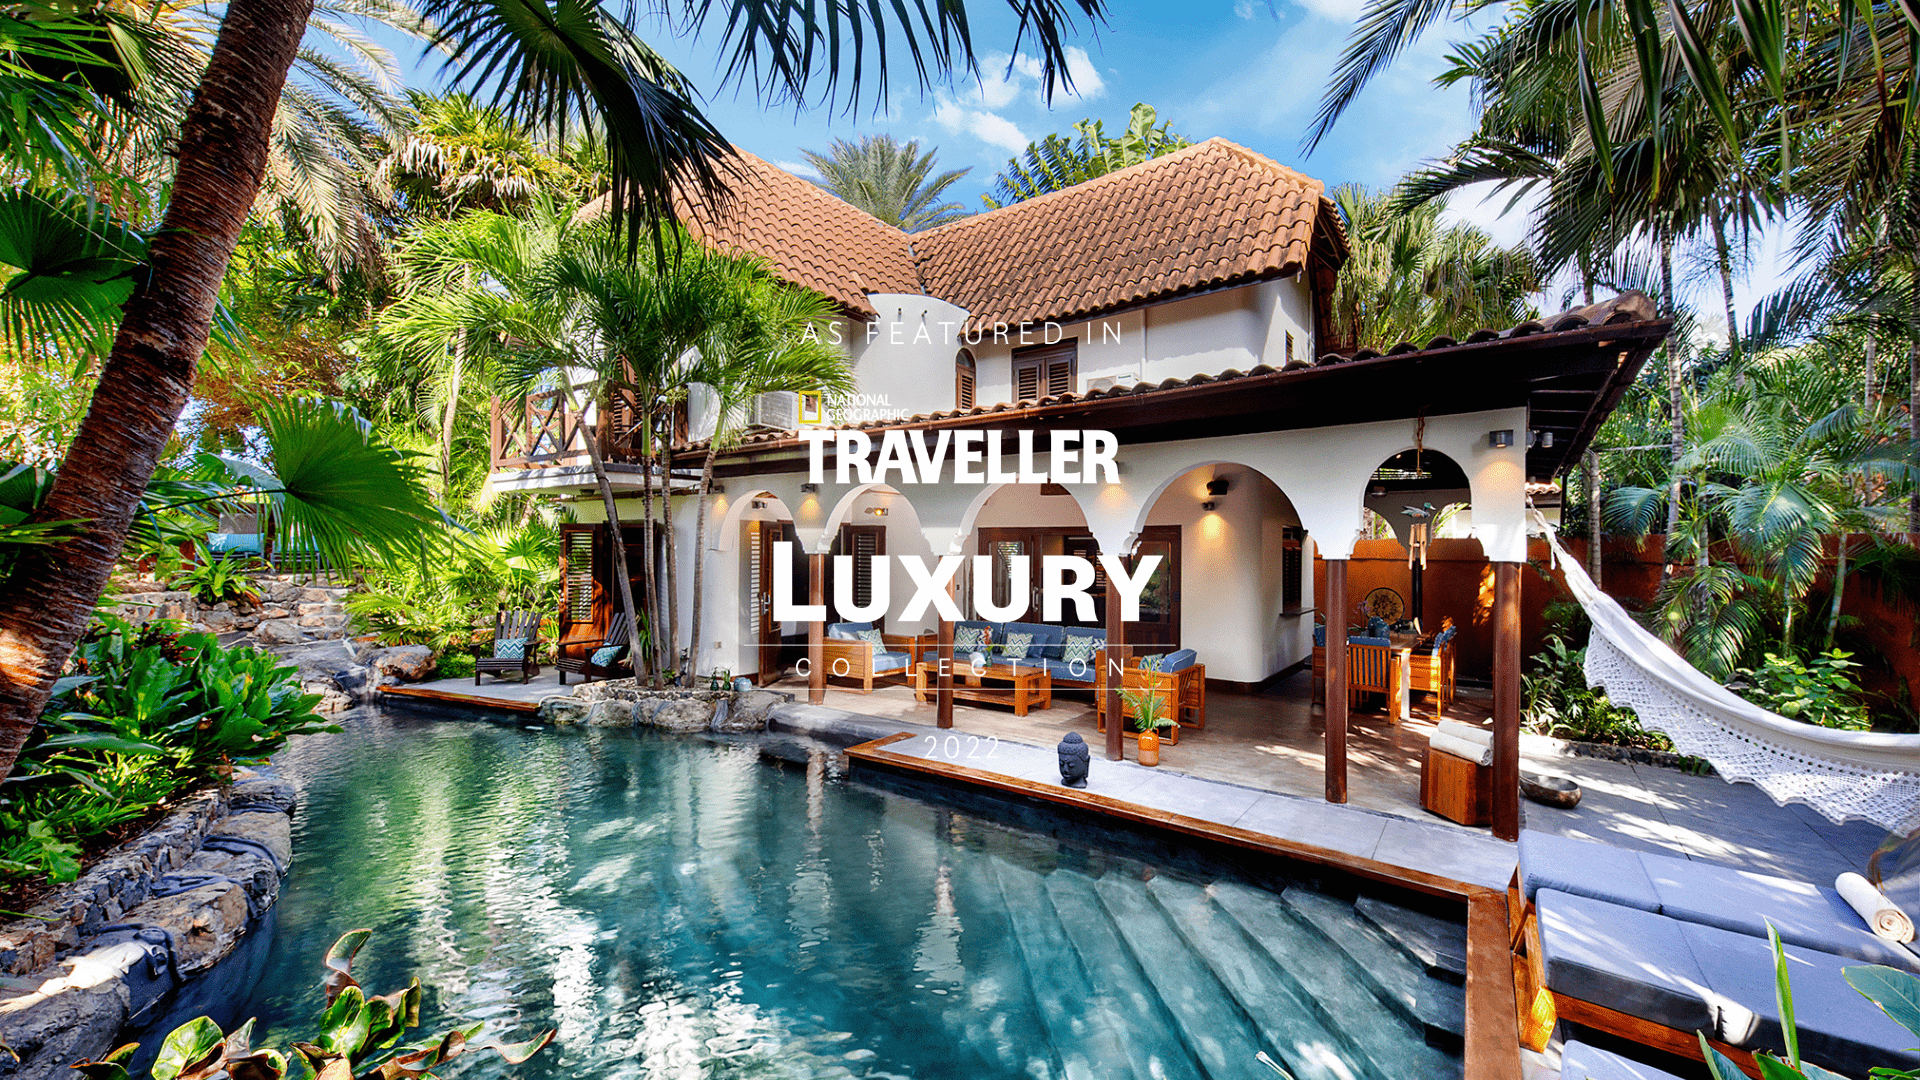 FEATURED IN NATIONAL GEOGRAPHIC TRAVELLER LUXURY COLLECTION 2022